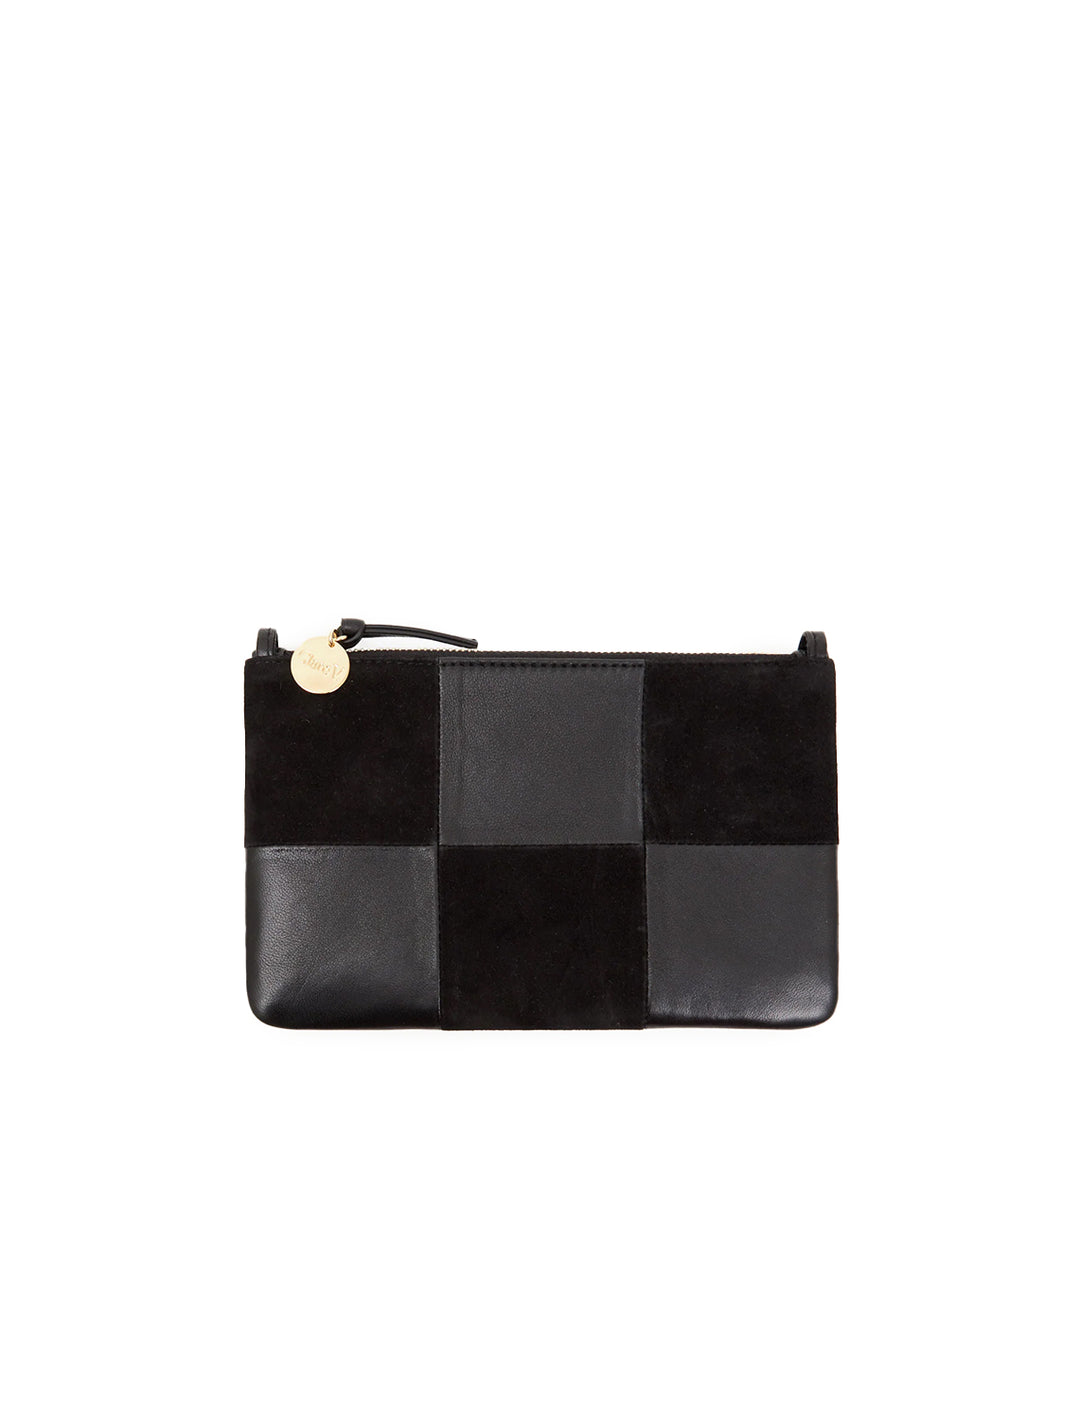 Front view of Clare V.'s wallet clutch with tabs in black suede and nappa patchwork.